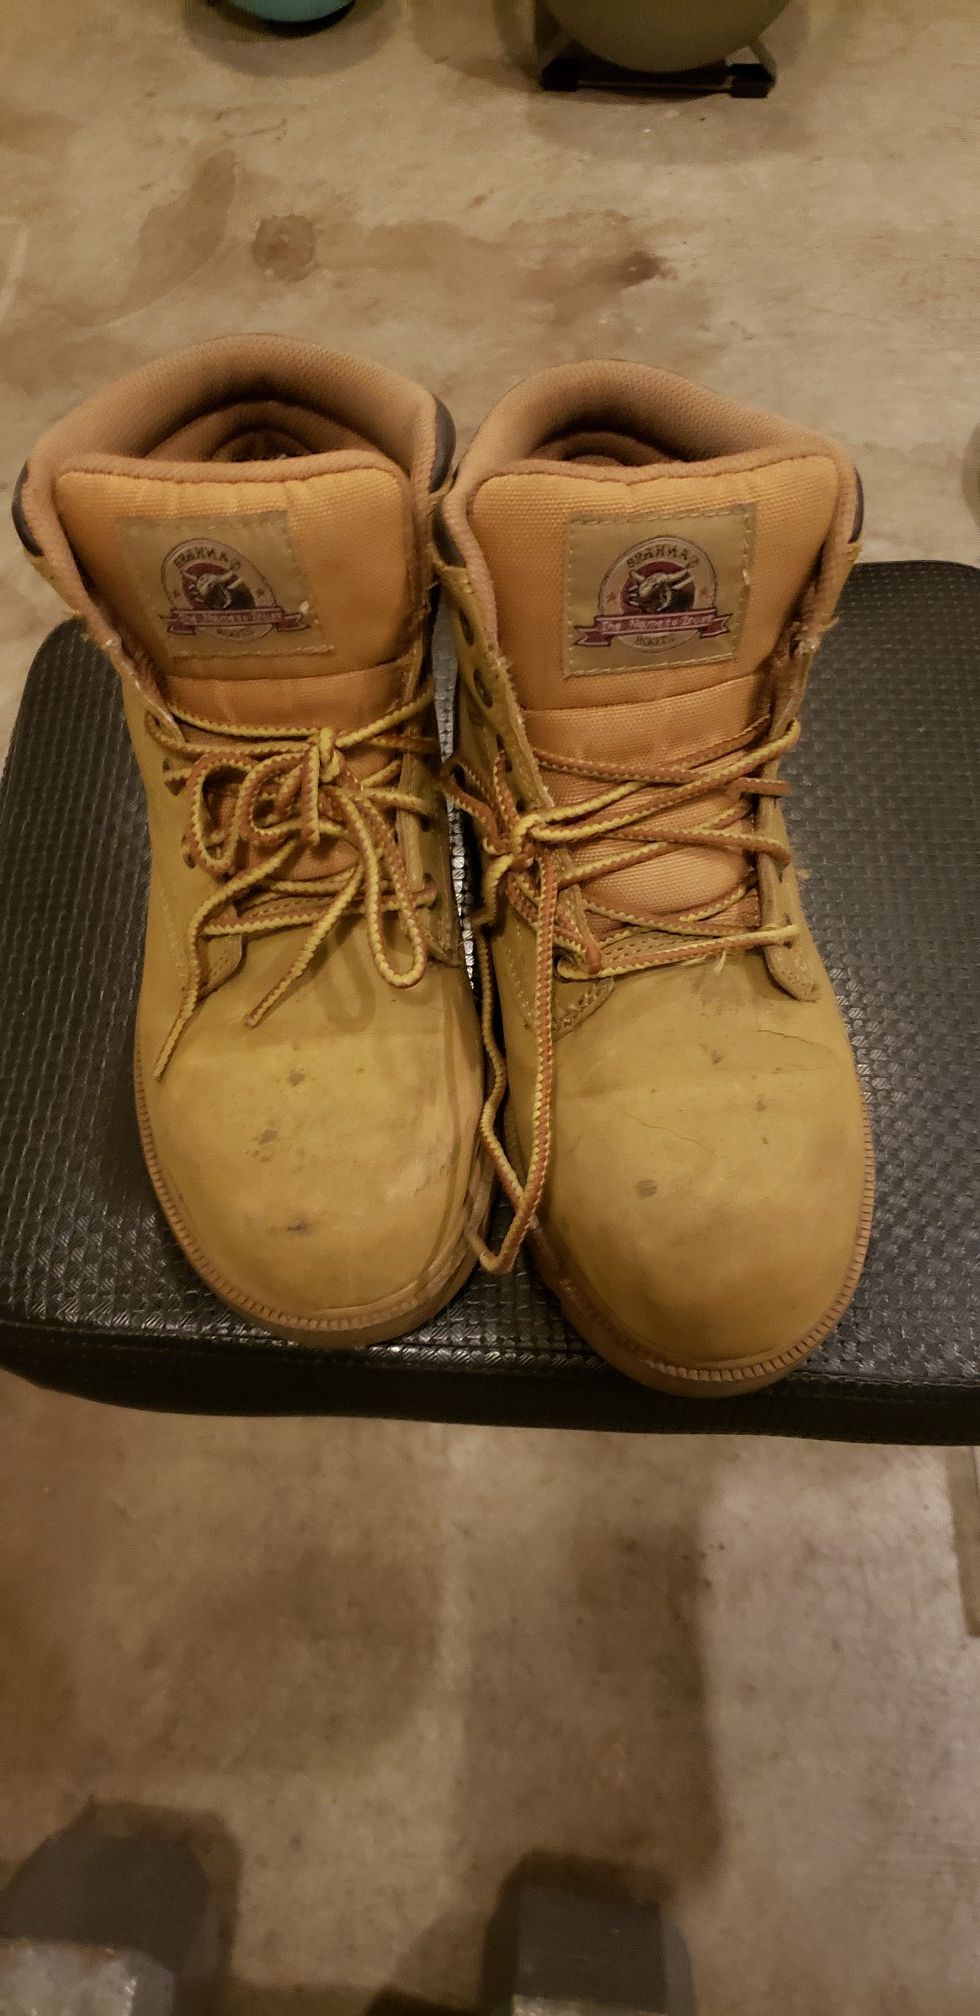 Womens work boots size 7.5